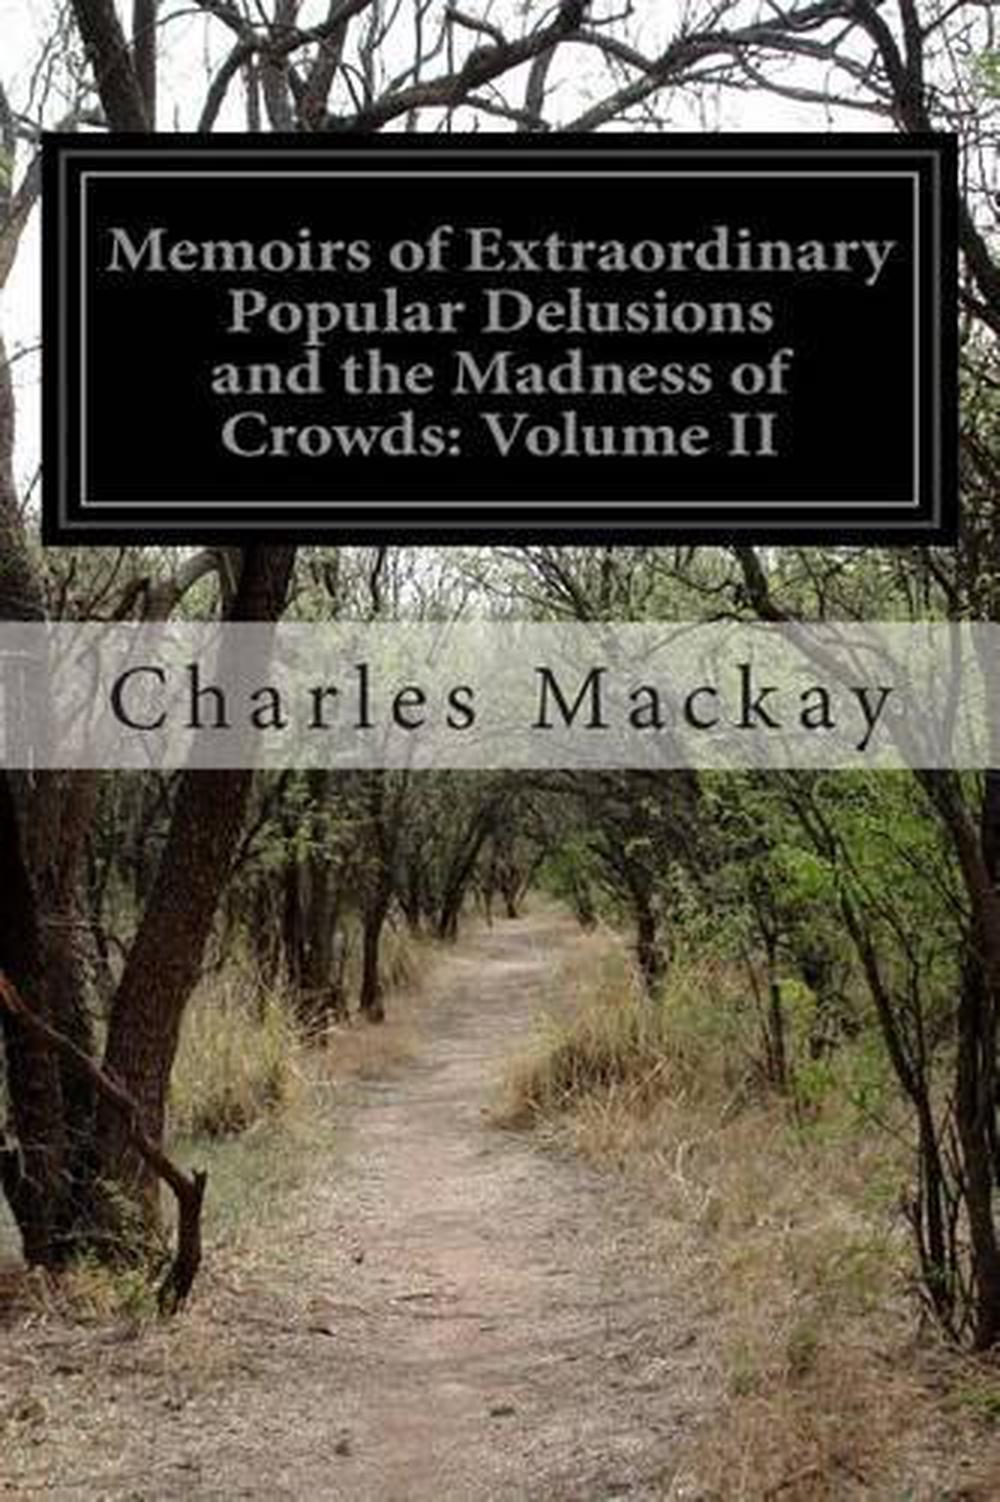 Memoirs of Extraordinary Popular Delusions and the Madness of... by Charles Mackay